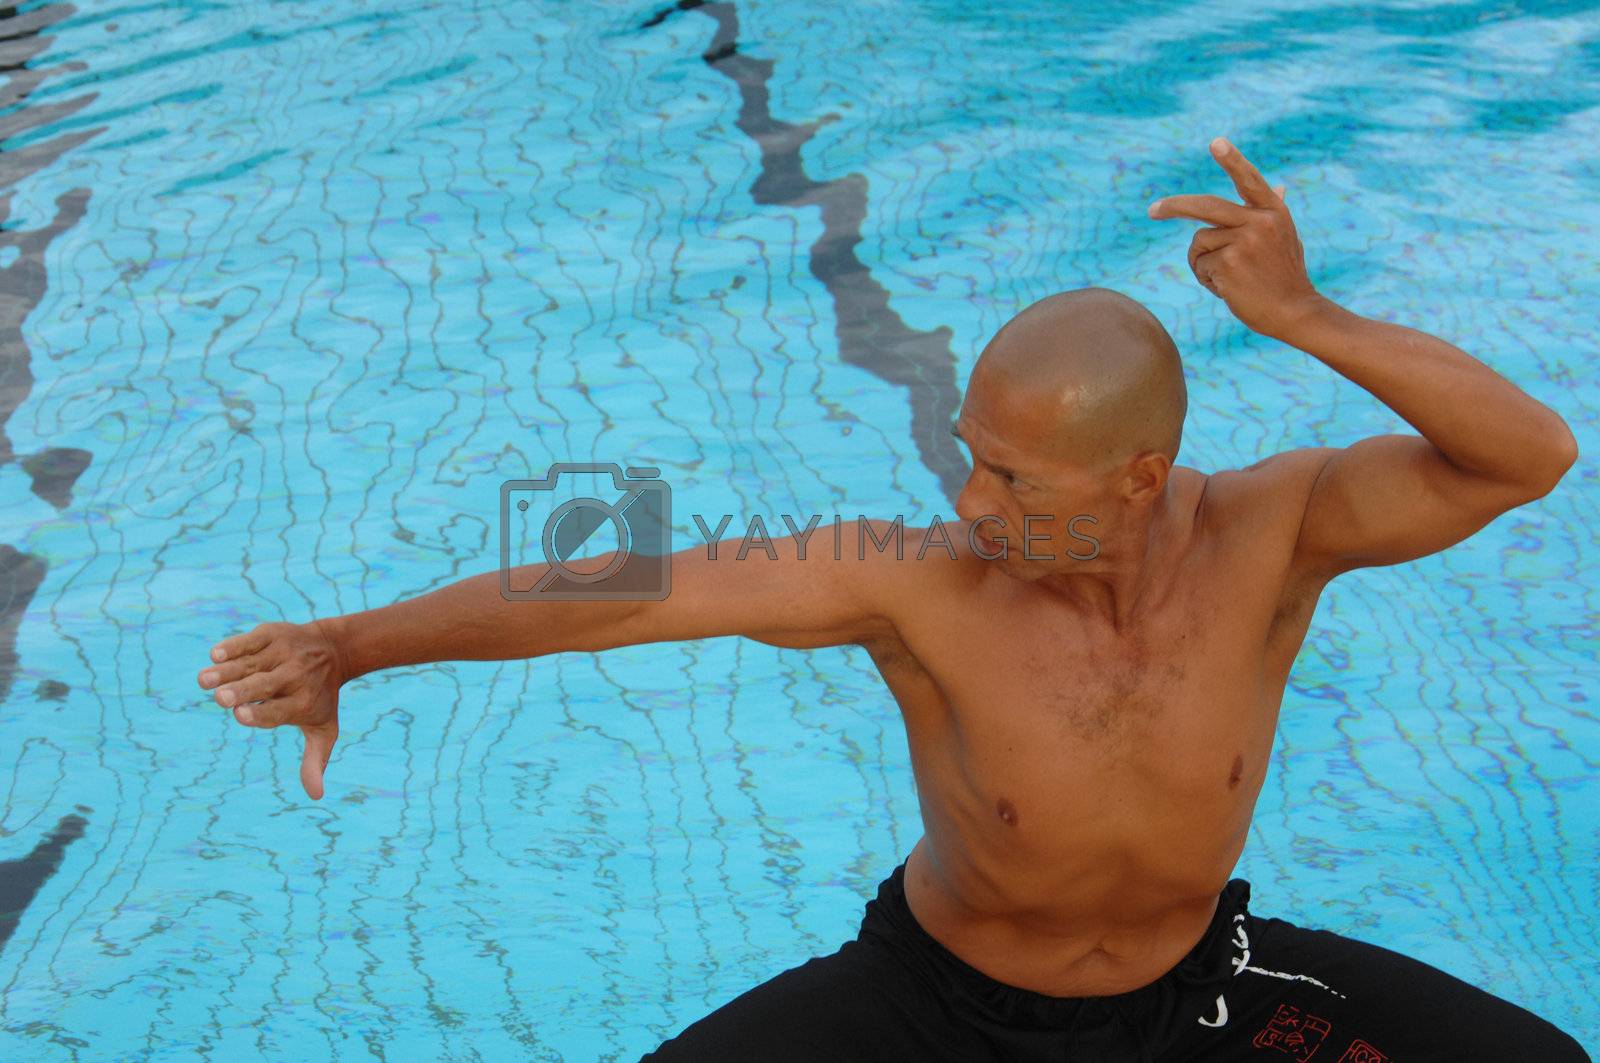 Royalty free image of Martial art by swimnews